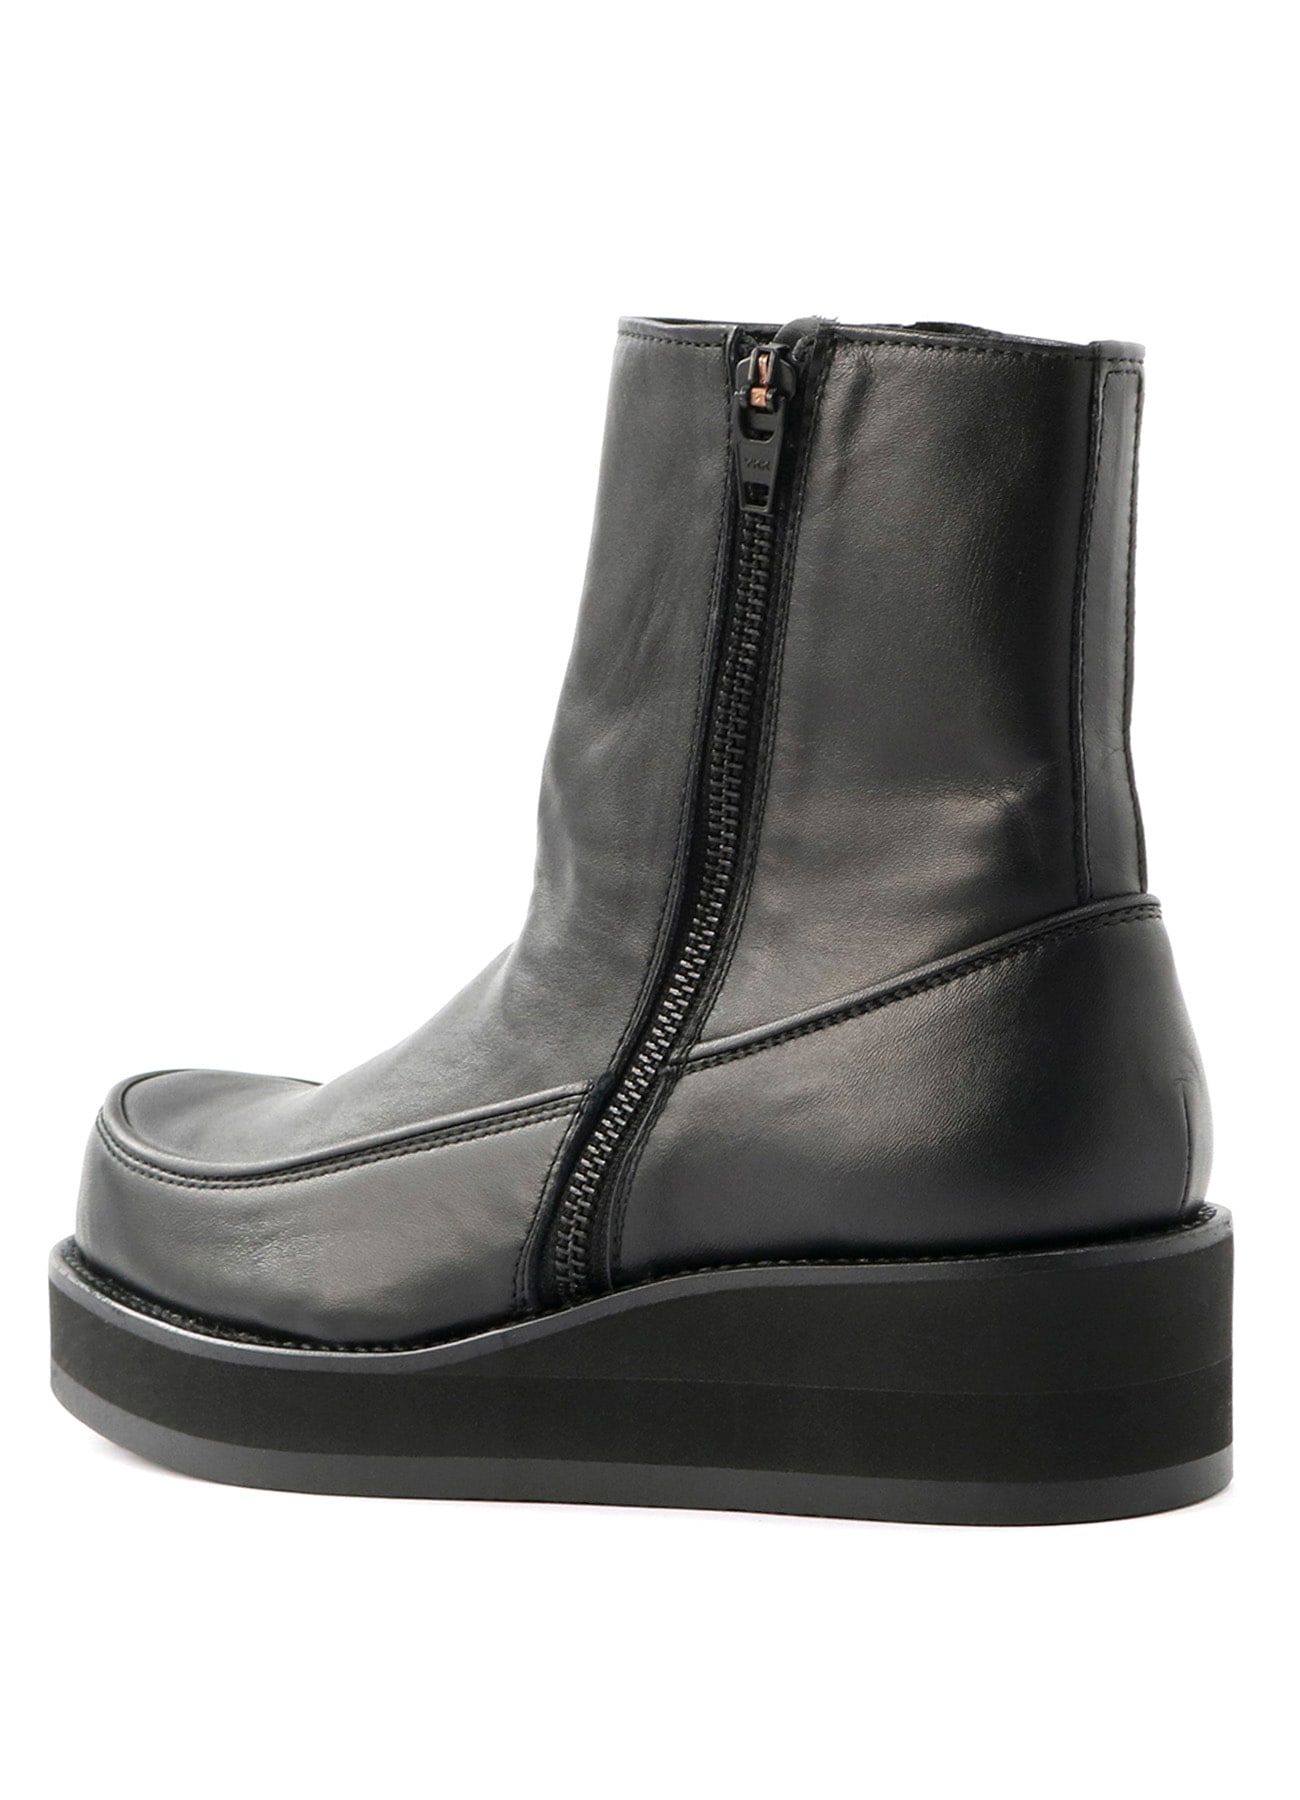 Smooth leather platform W zip boots (US 5.5 Black): Y's ｜ THE 